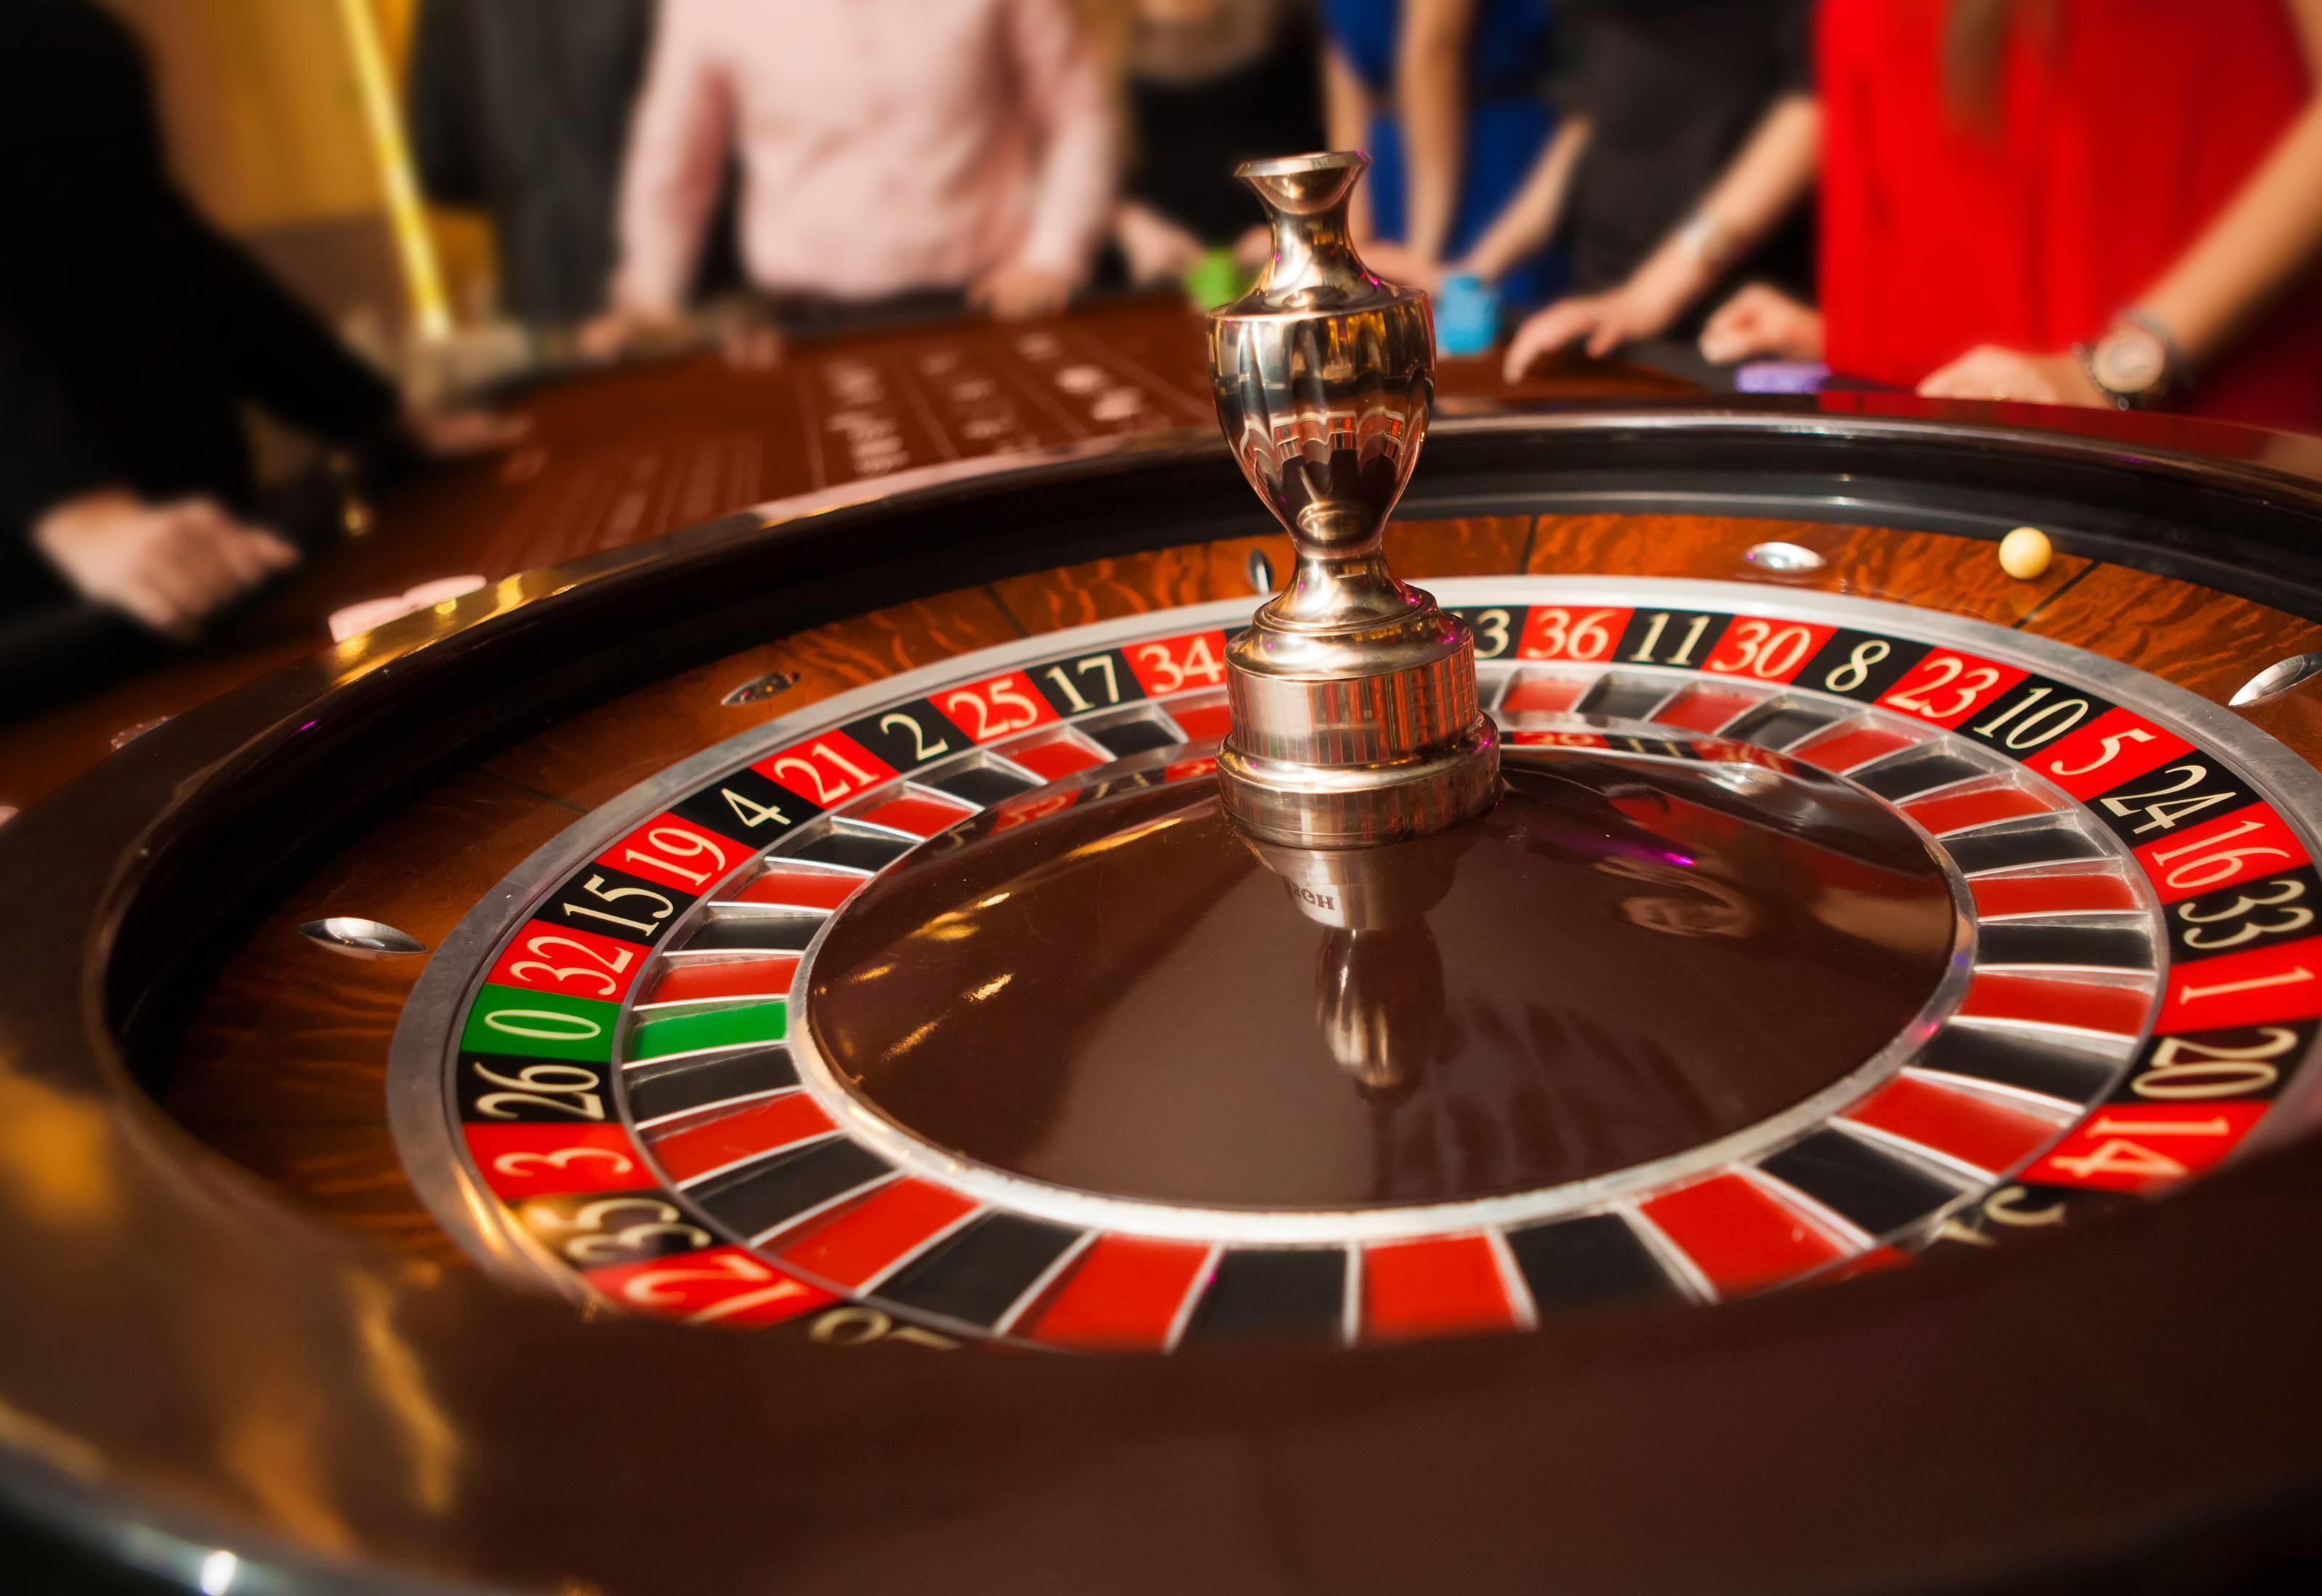 Hoteliers want tourist-only casinos in order to attract Chinese gamblers